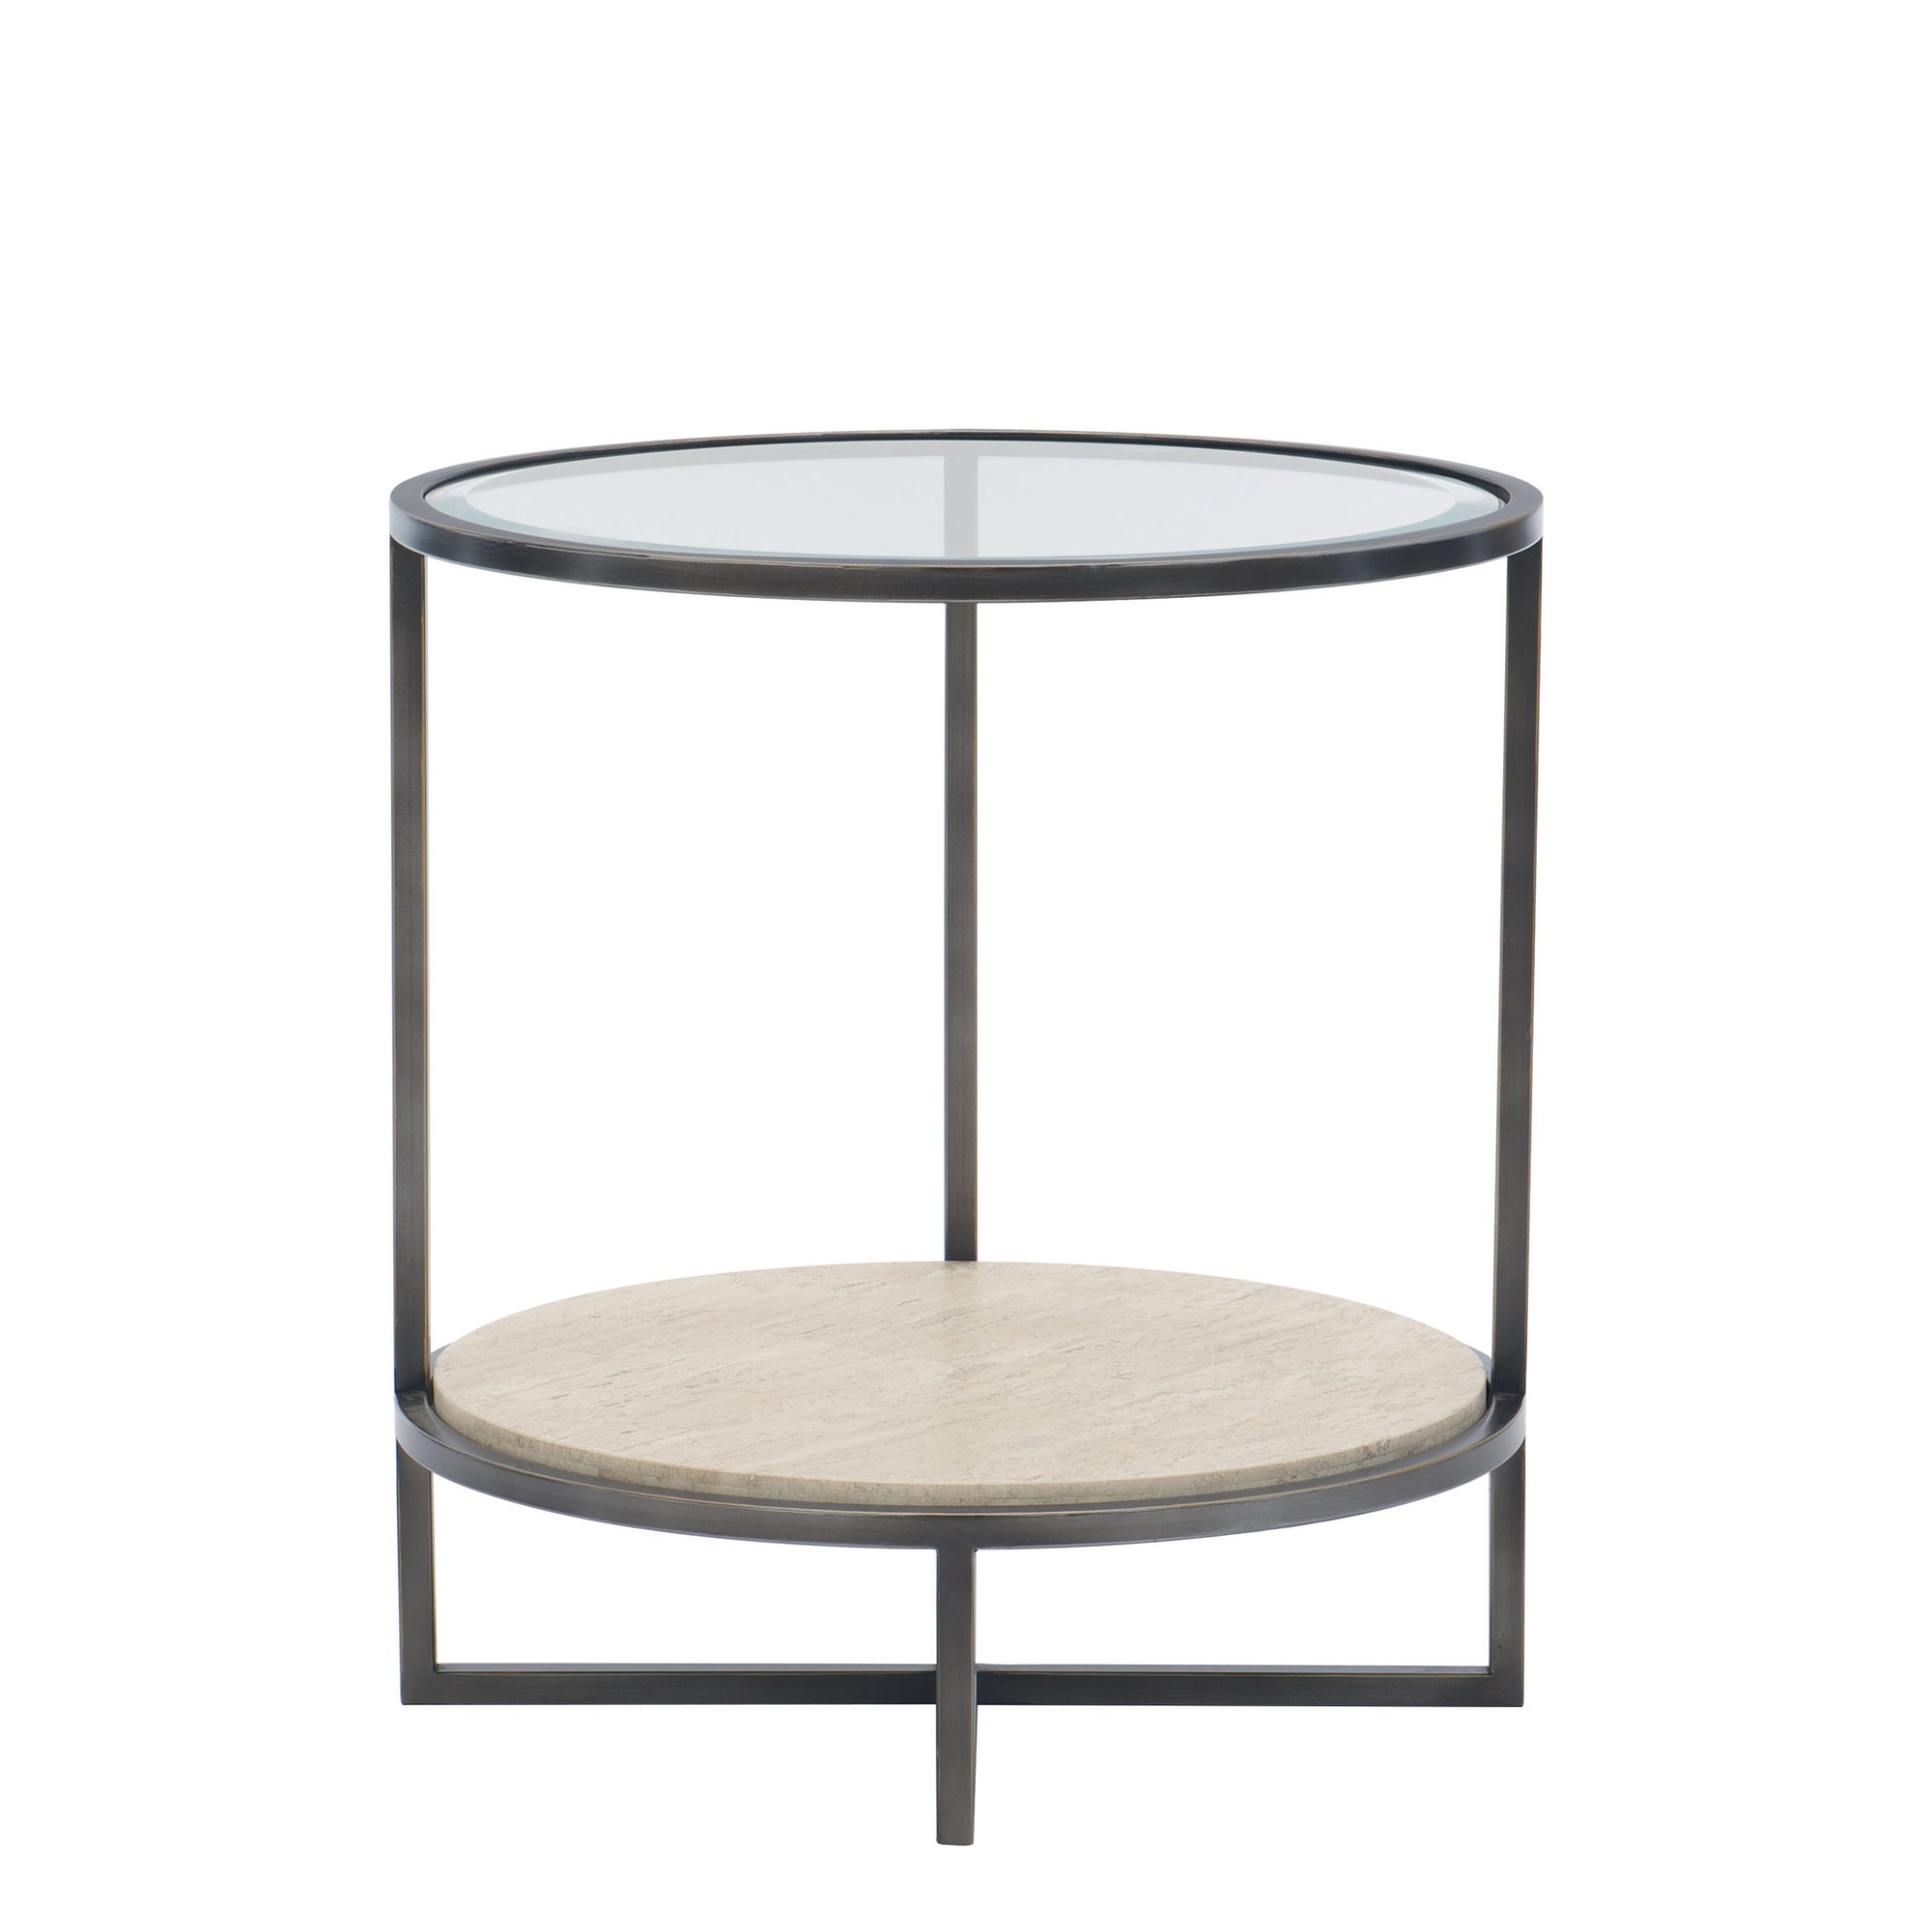 Harlow Metal Round Chair Side Table